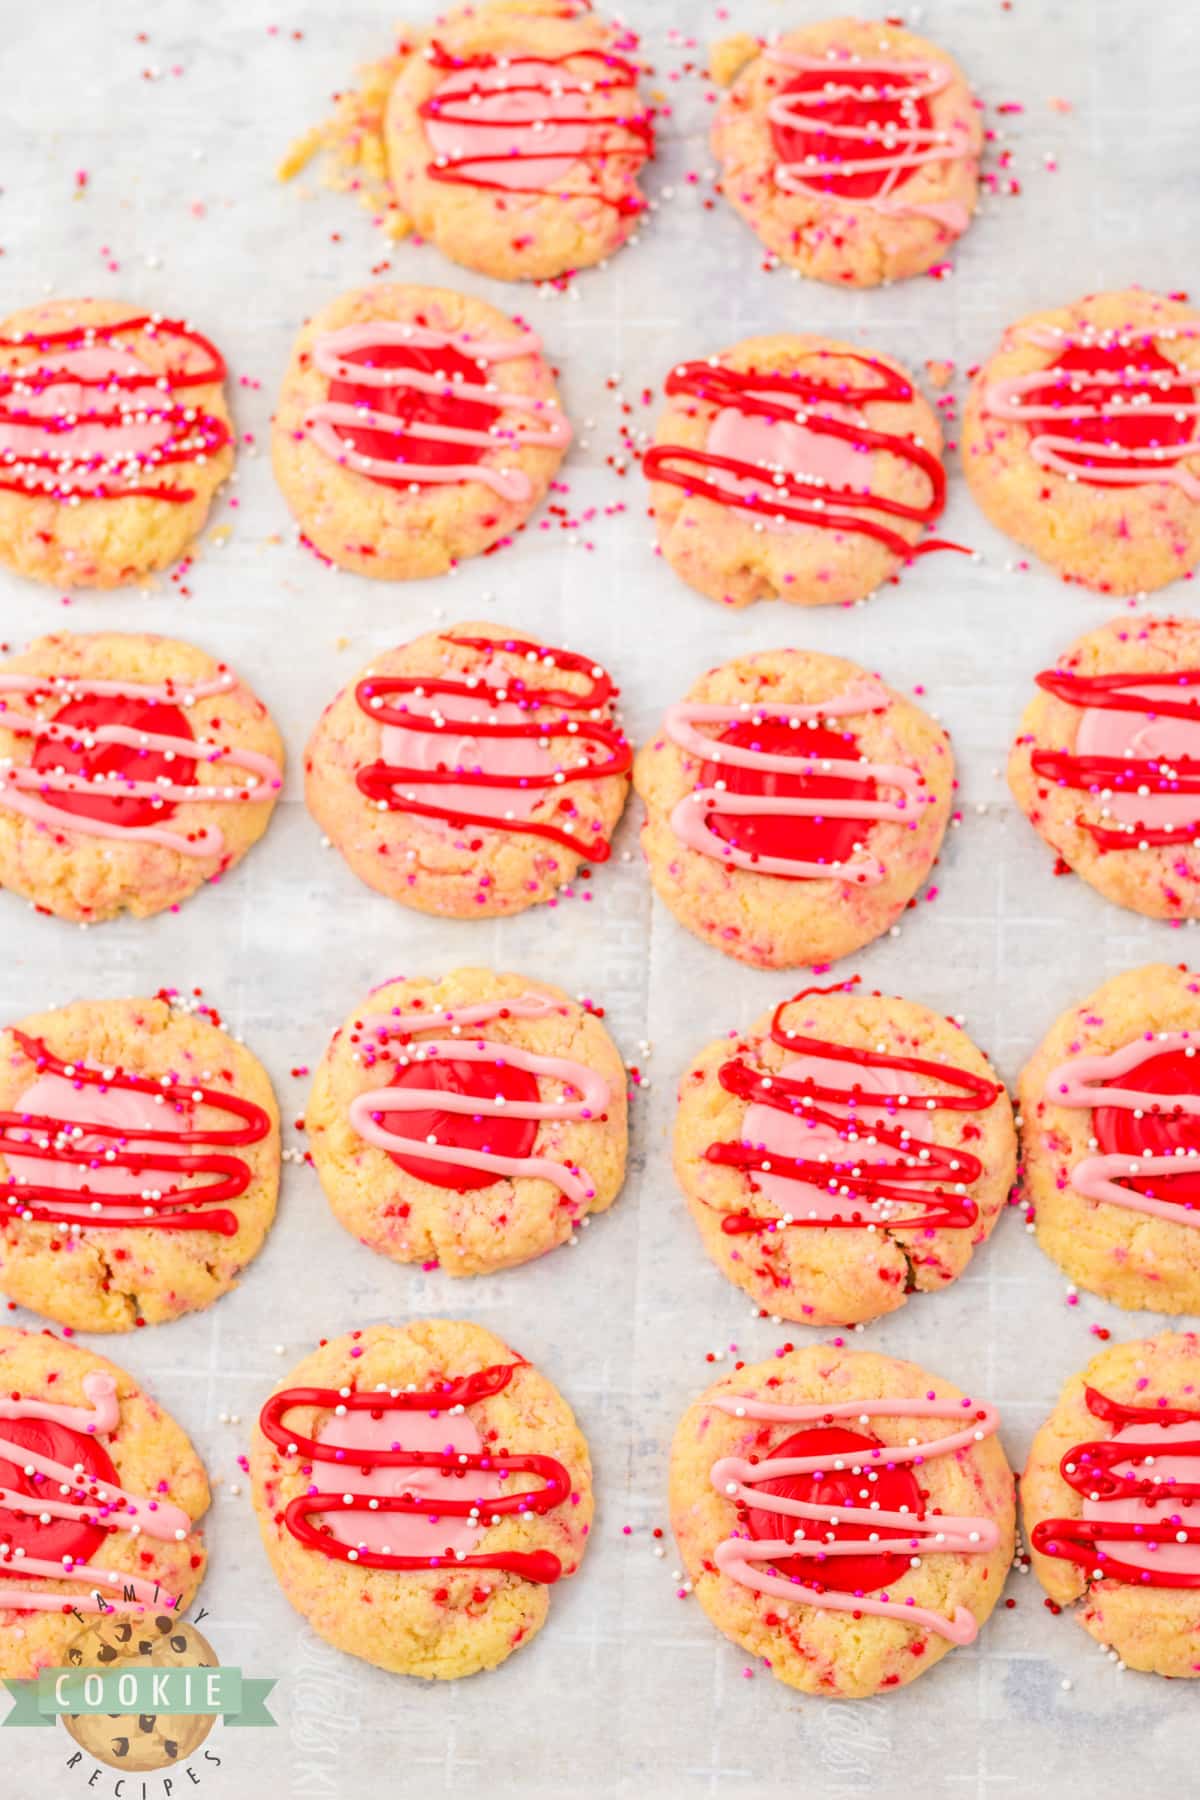 Adding drizzle and sprinkles to the cookies.